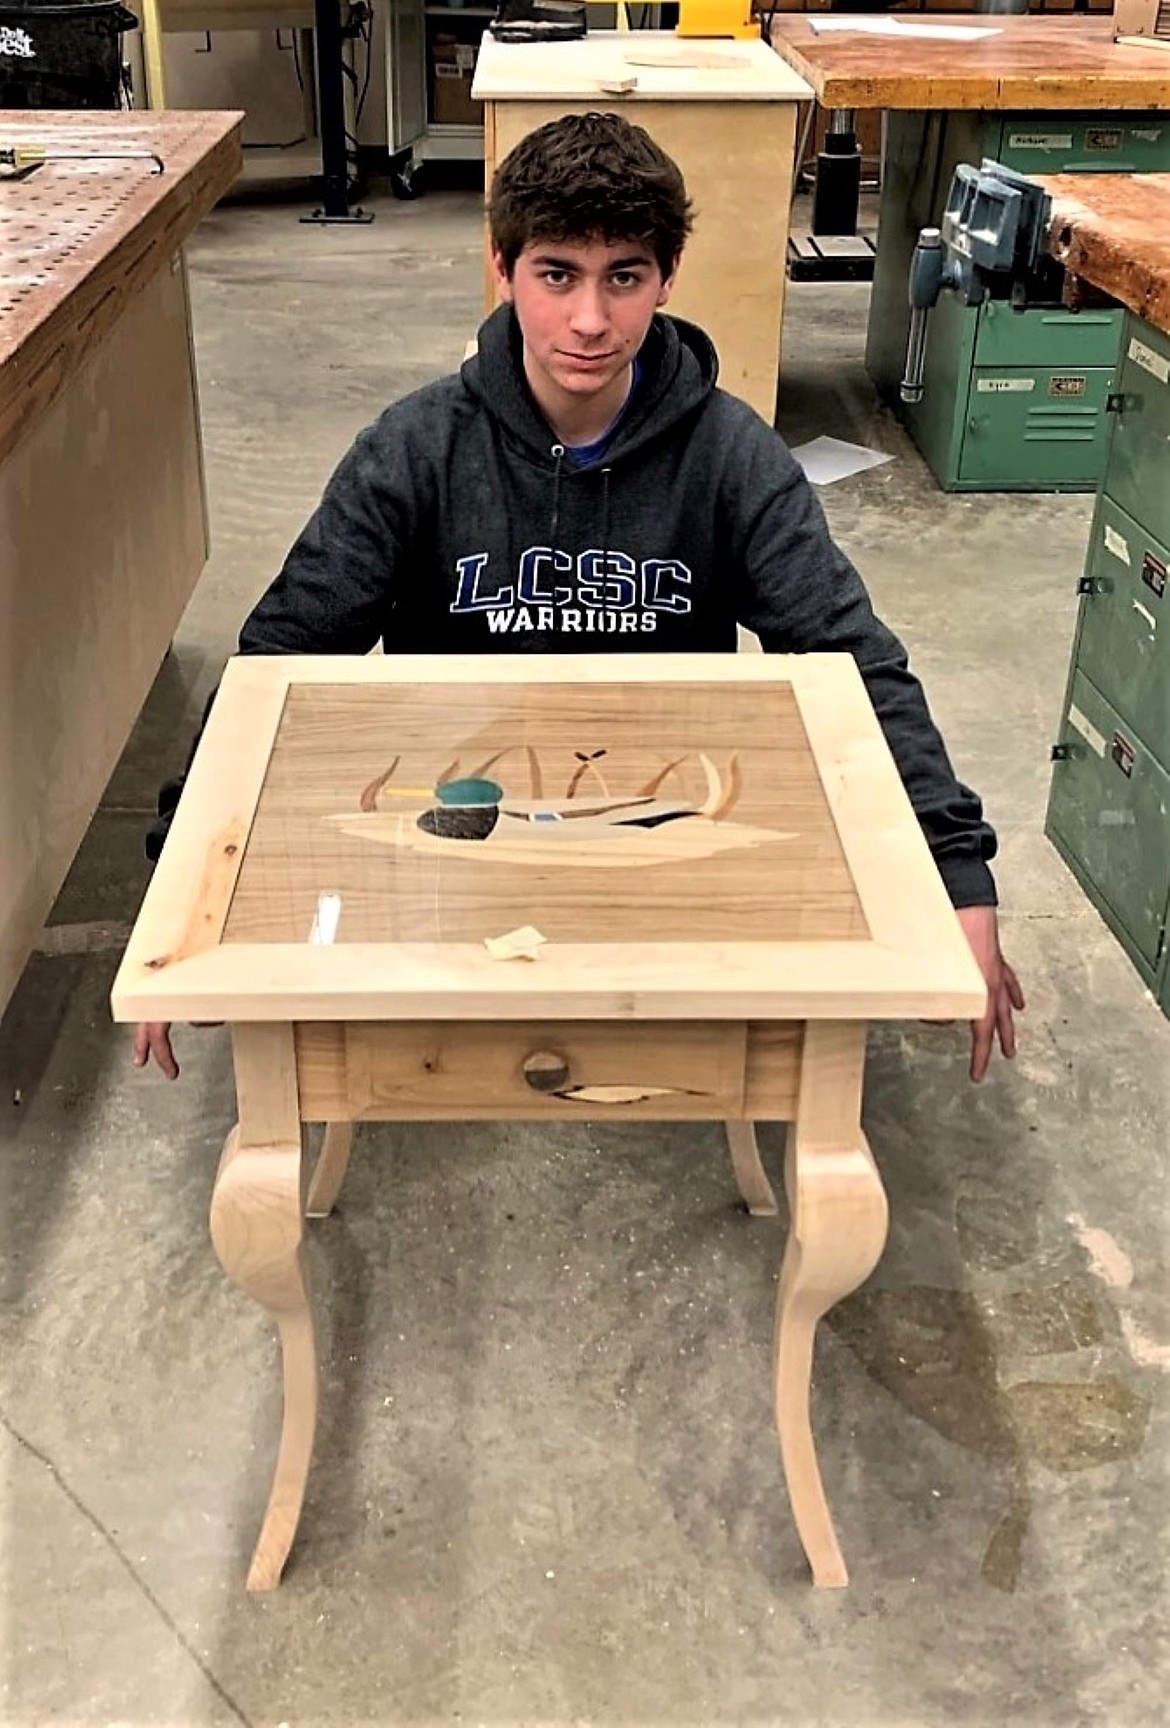 Ryan Carelli poses with his table, which features a variety of natural and dyed woods to create a marquetry duck design on the table top.